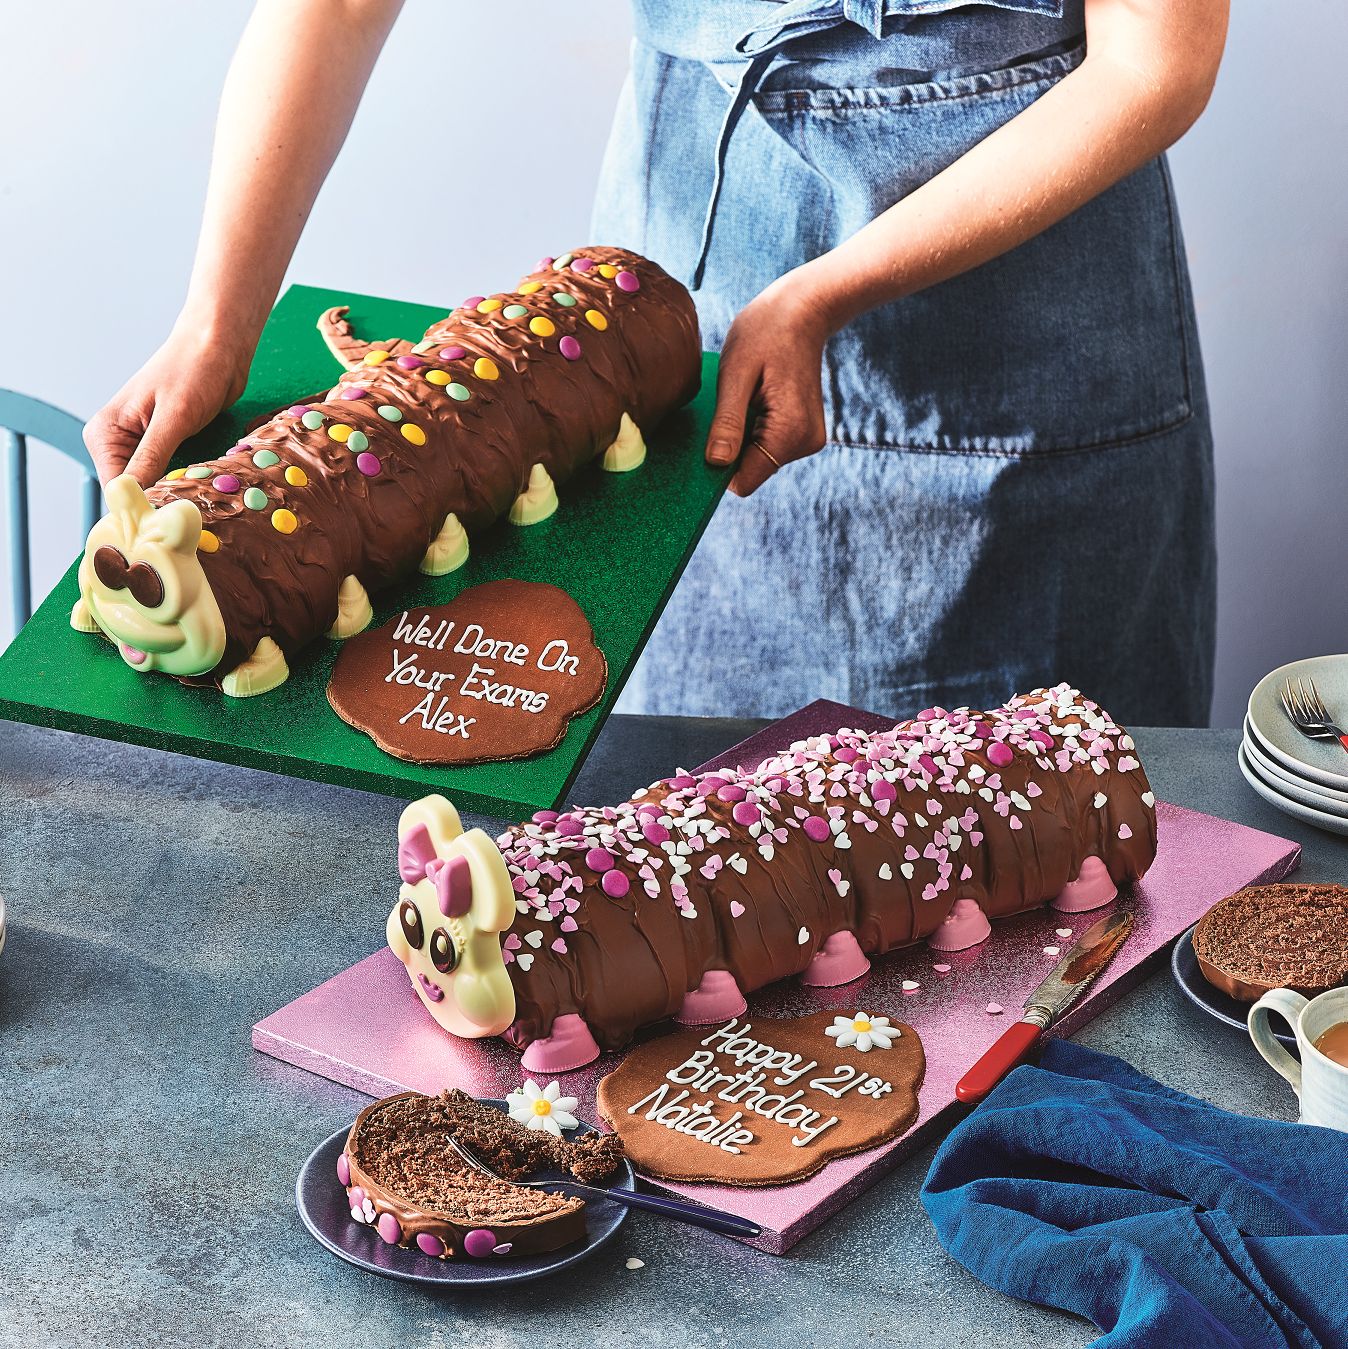 giant personalised colin the caterpillar cake